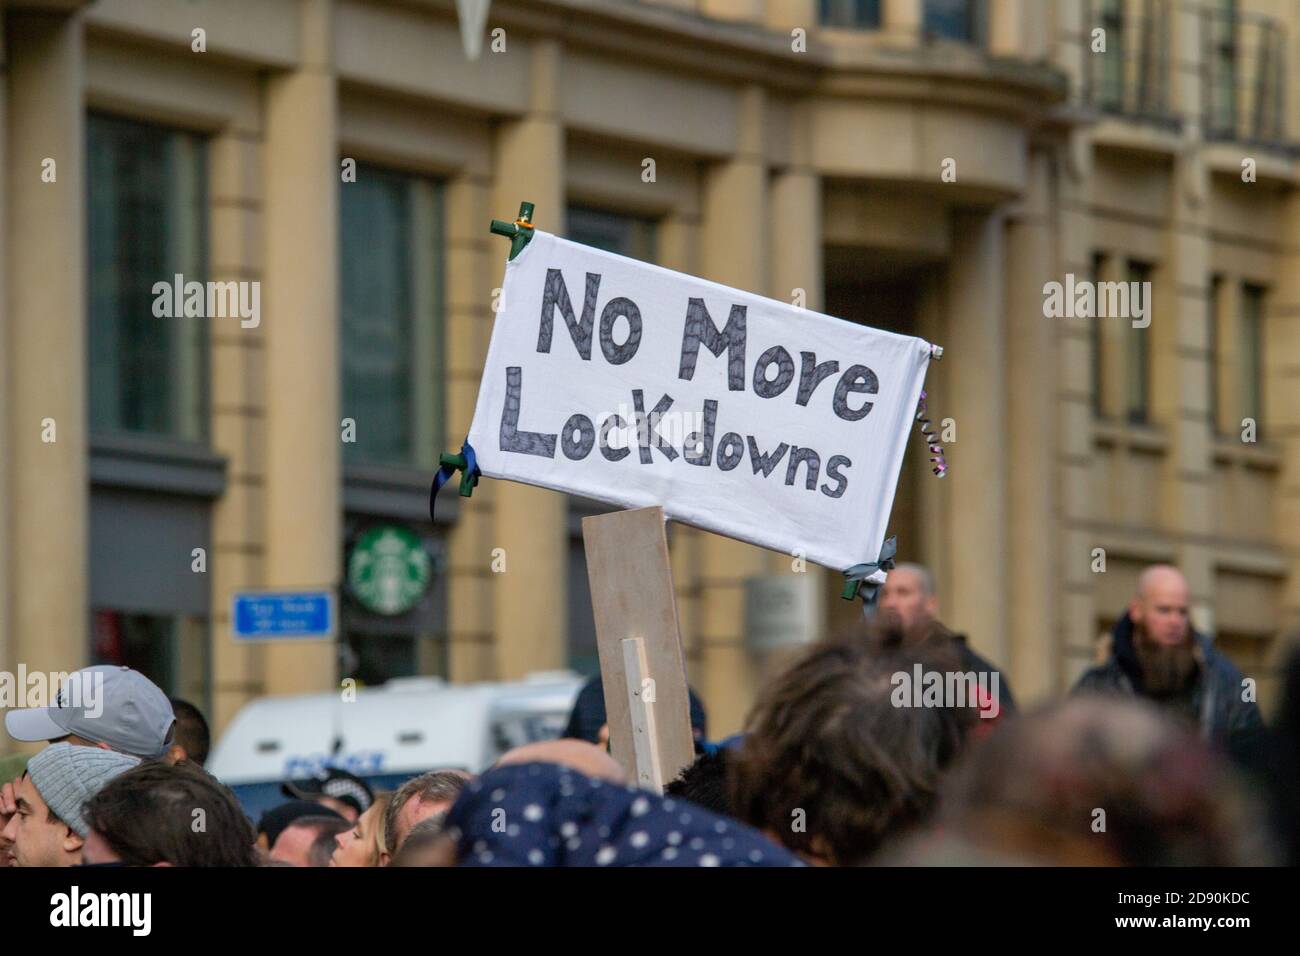 'No more lockdowns' sign at Freedom Rally in Birmingham on 31st October, as Boris Johnson announces a month long national lockdown Stock Photo